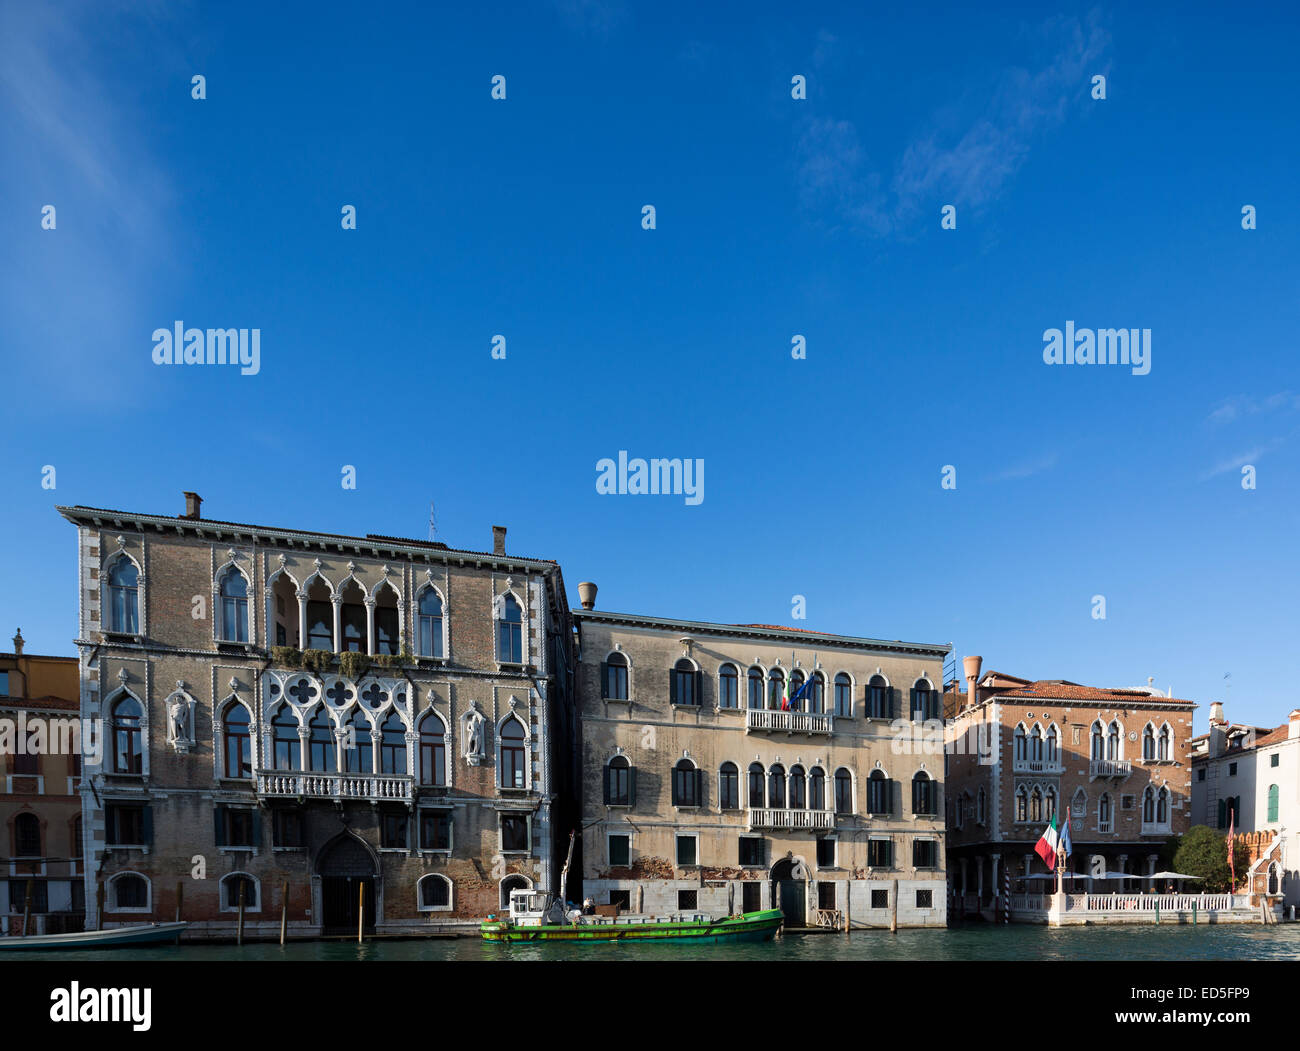 villas and palaces, Grand Canal, Venice, Italy Stock Photo